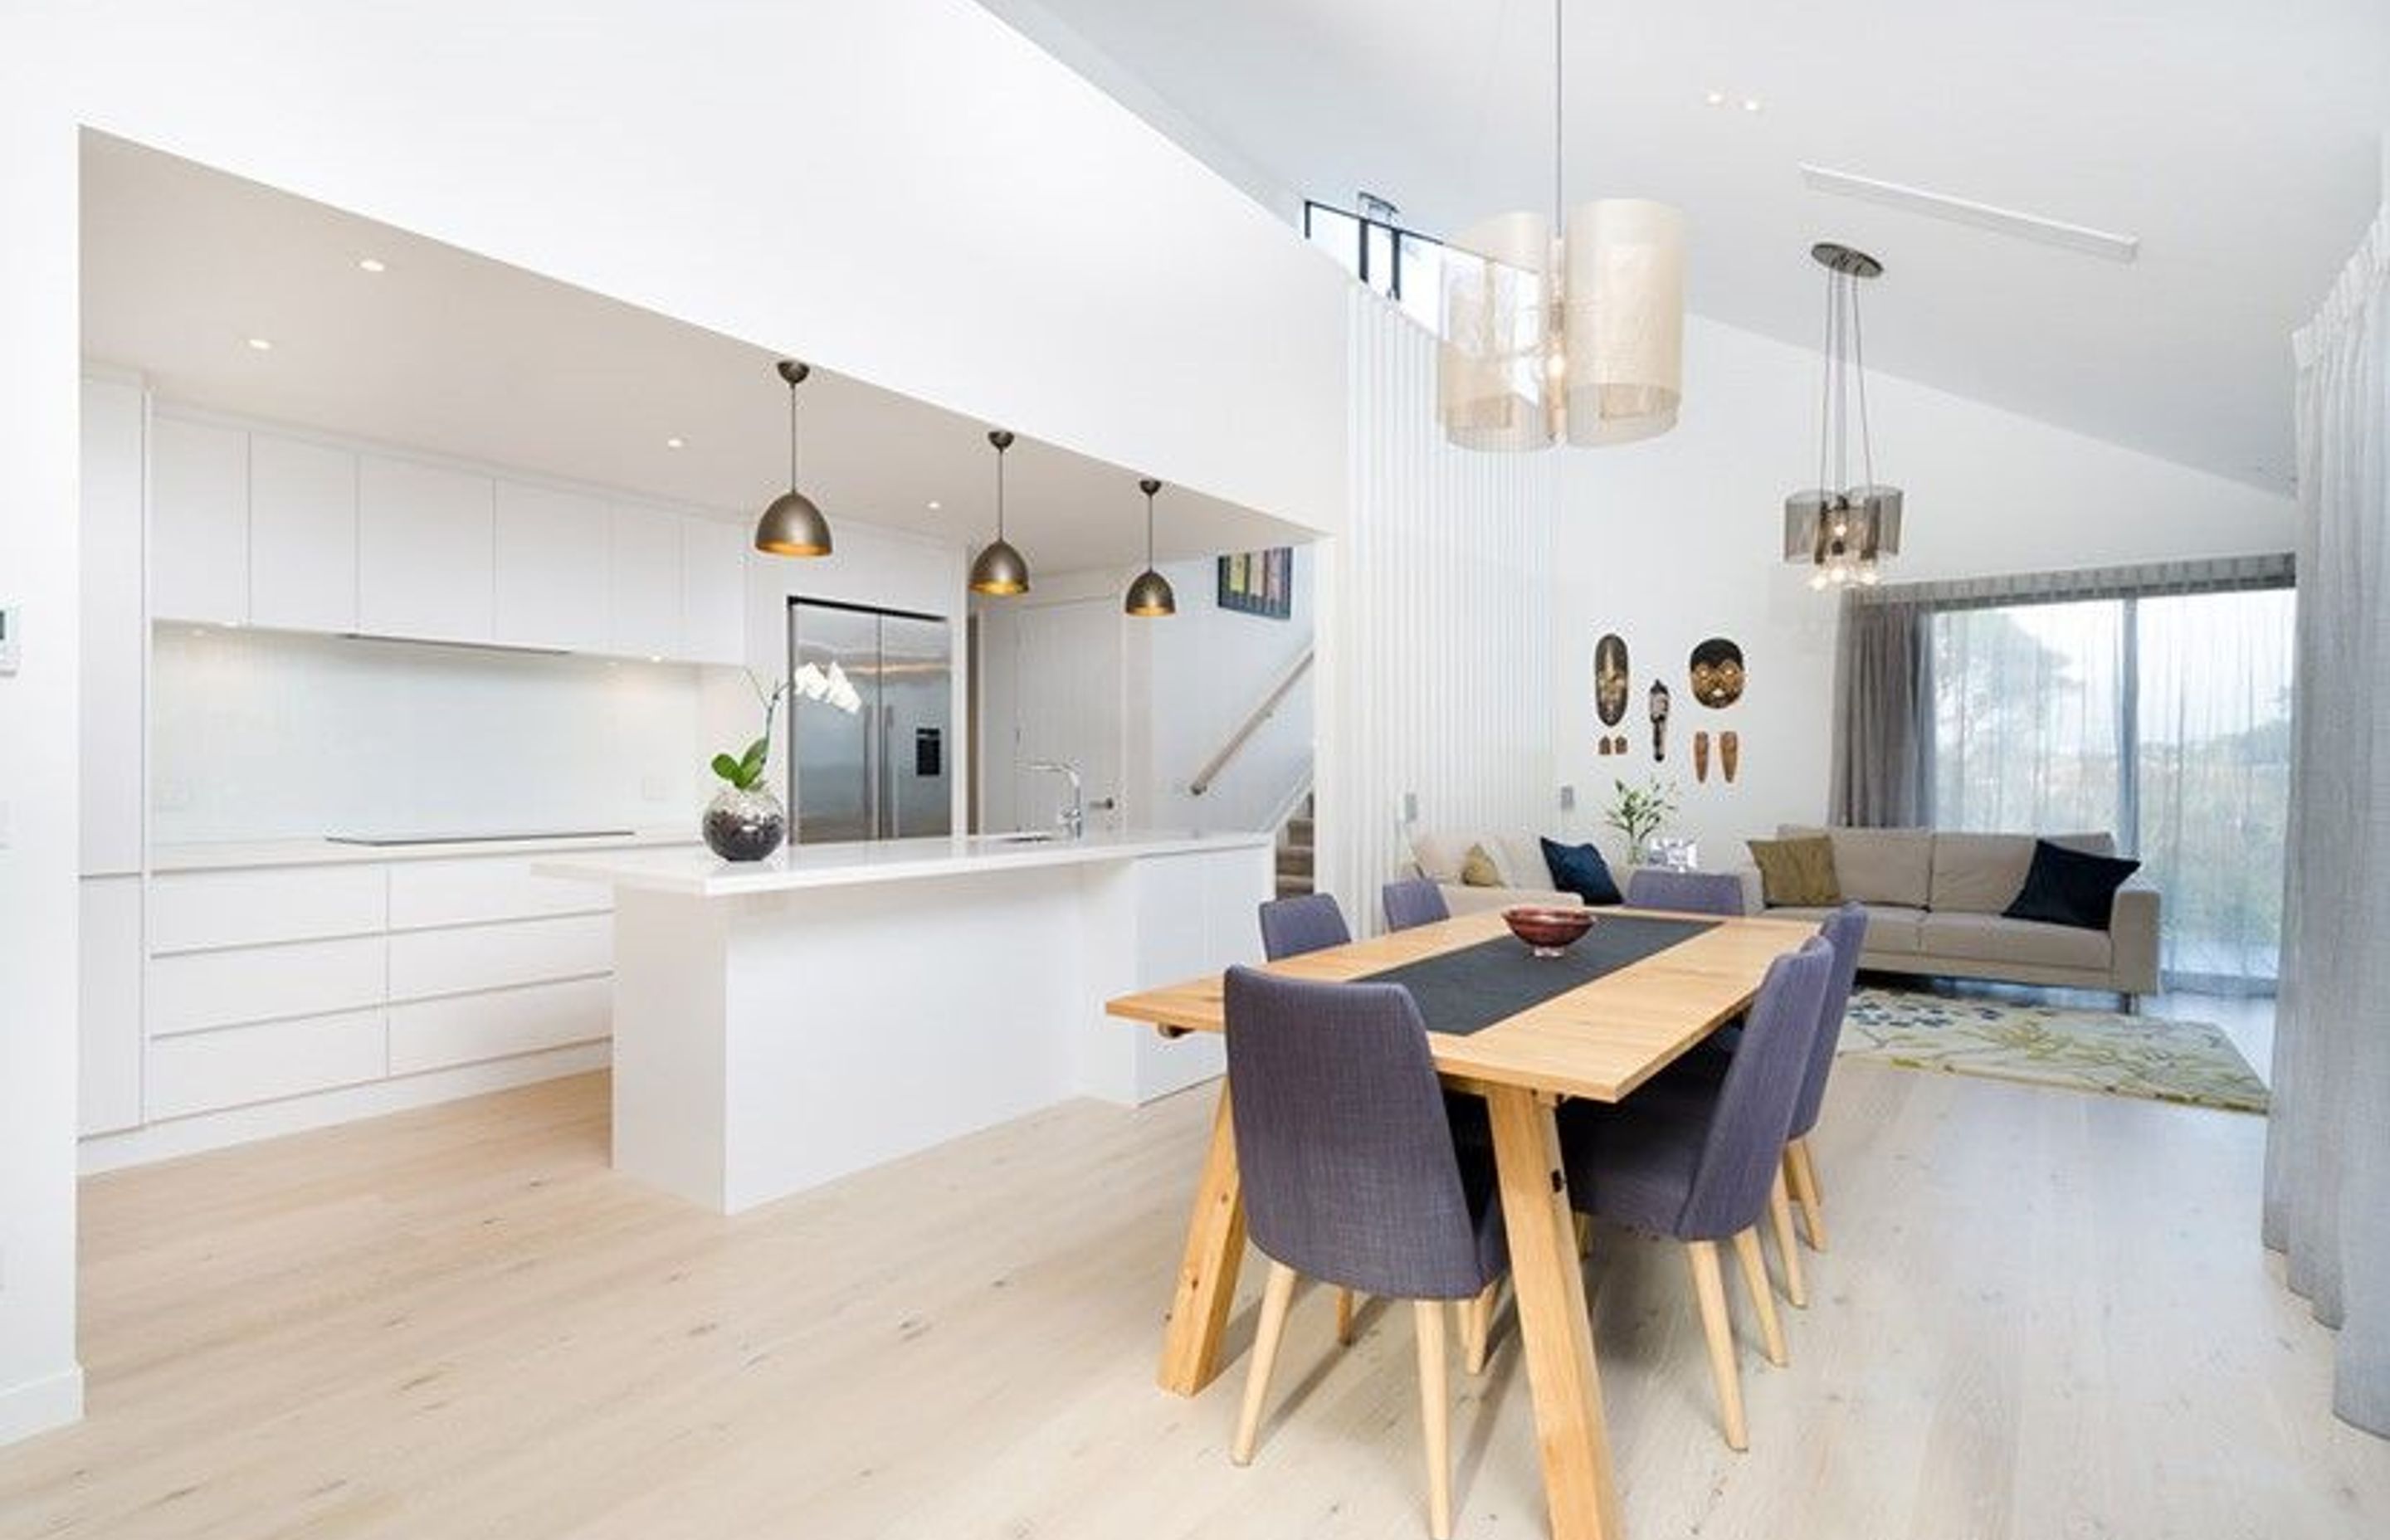 Hobsonville Pt Home - Solid American White Oak flooring finished w/ Bona Stain in 'White' + Waterborne Polyurethane